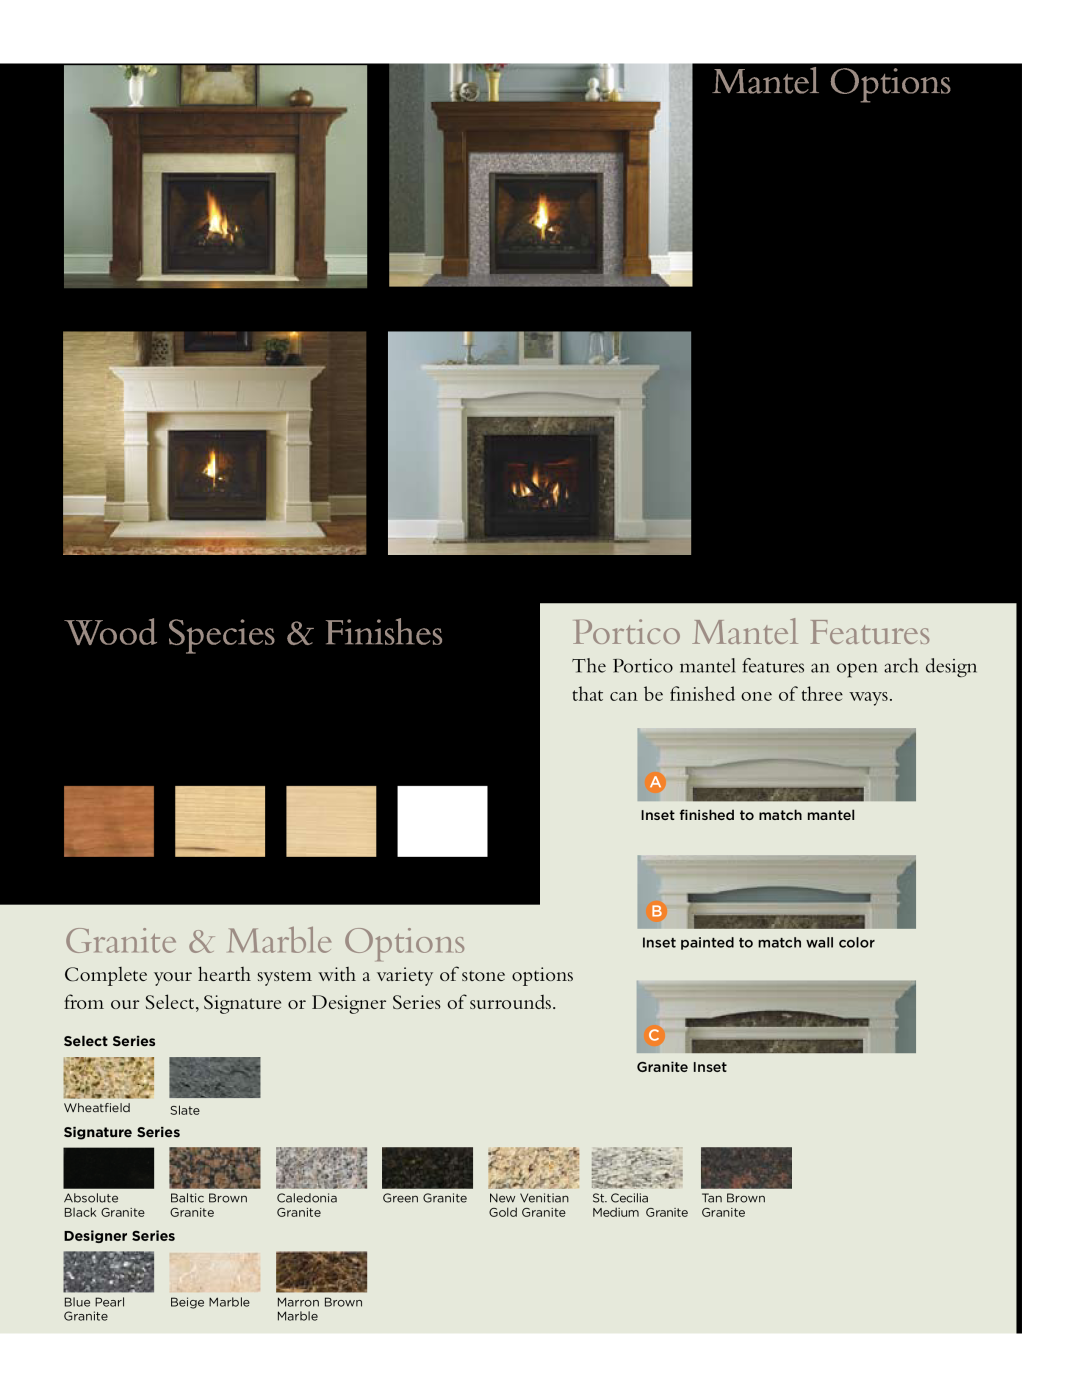 Heat & Glo LifeStyle 6000 Series manual Mantel Options, Wood Species & Finishes, Portico Mantel Features 